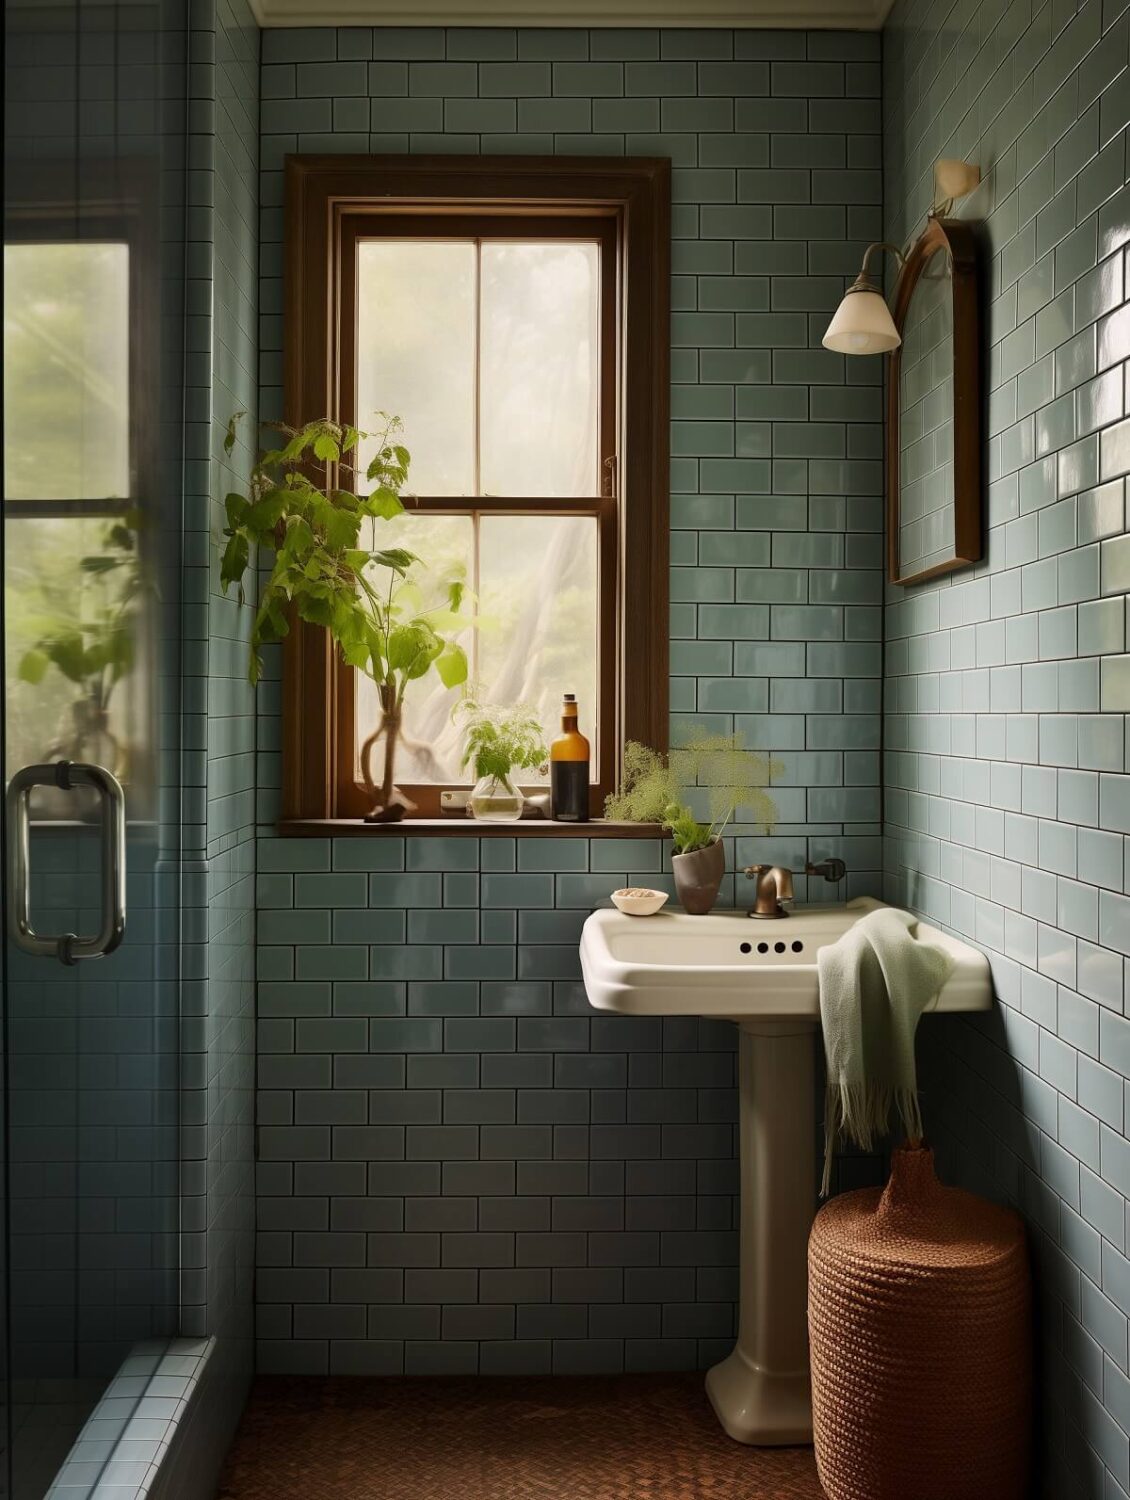 https://www.thenordroom.com/wp-content/uploads/2021/11/small-bathroom-blue-tiles-victorian-home-nordroom-1130x1500.jpg